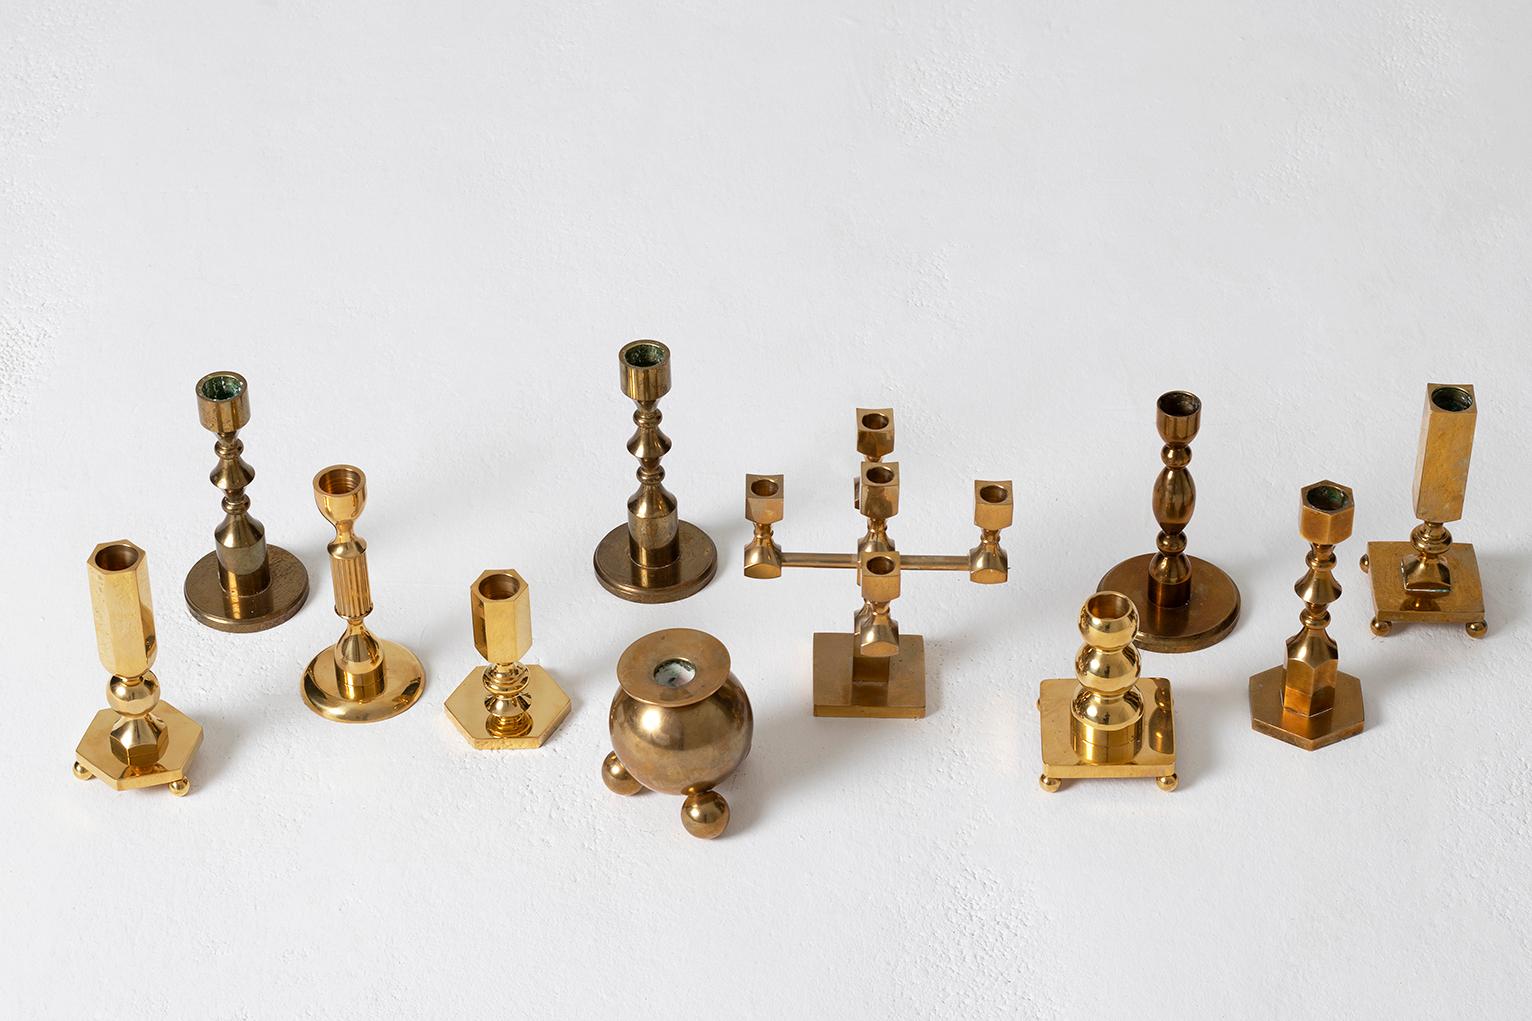 A collection of eleven brass candlesticks. All hand numbered.
Sweden (Gusum), Dated from 1979-1987.
Measures: From 9-14 cm tall.